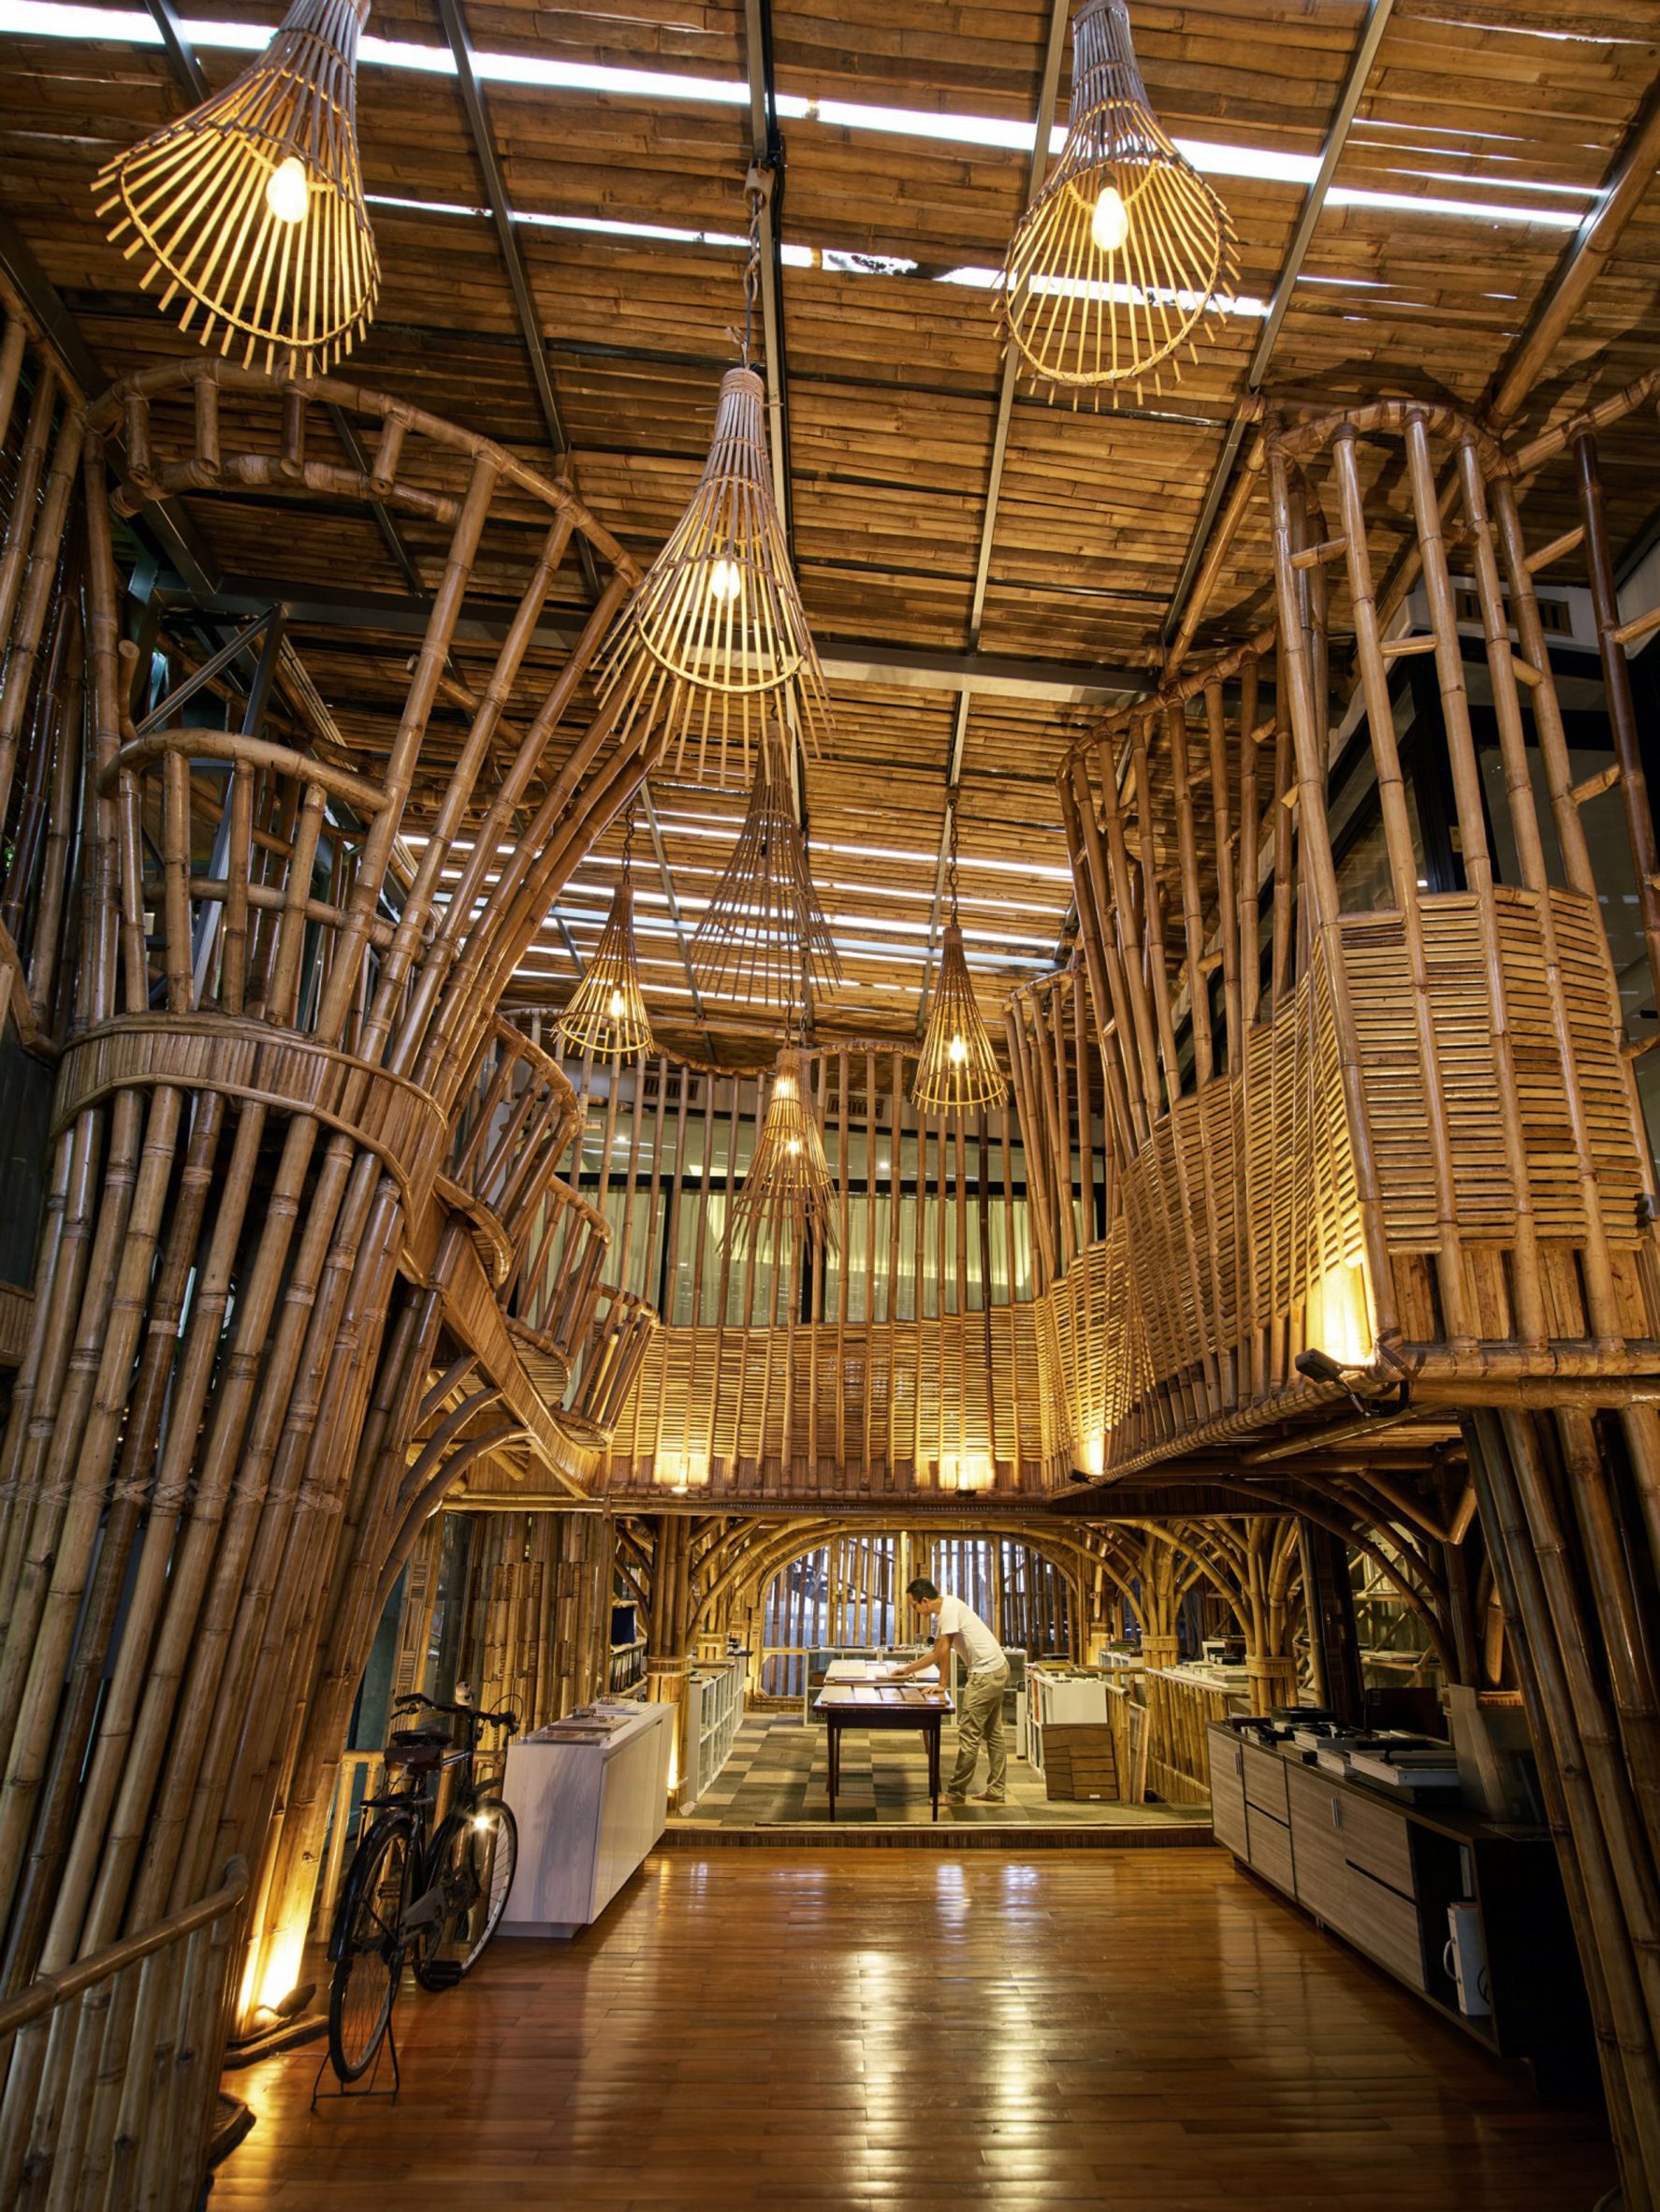 High bamboo ceiling